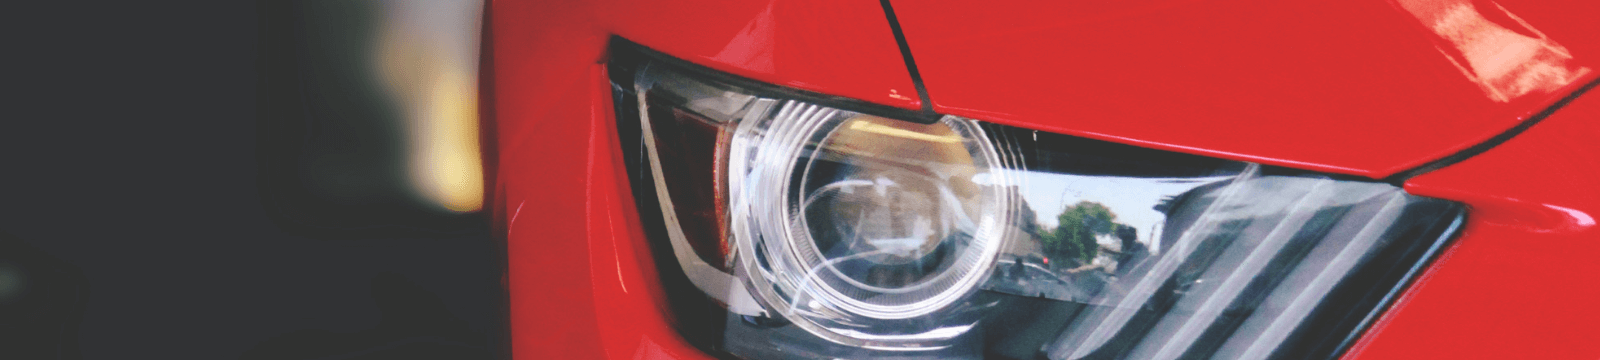 Headlight of a red vehicle